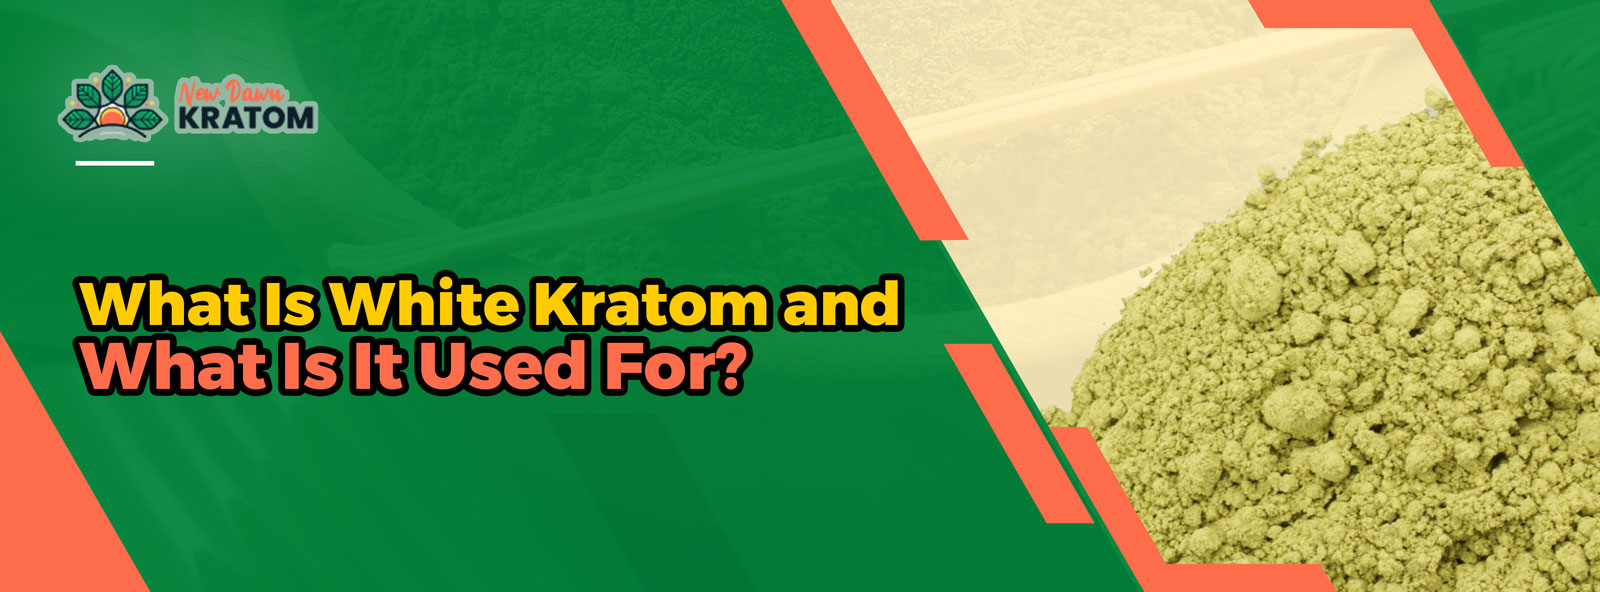 What Is White Kratom and What Is It Used For?